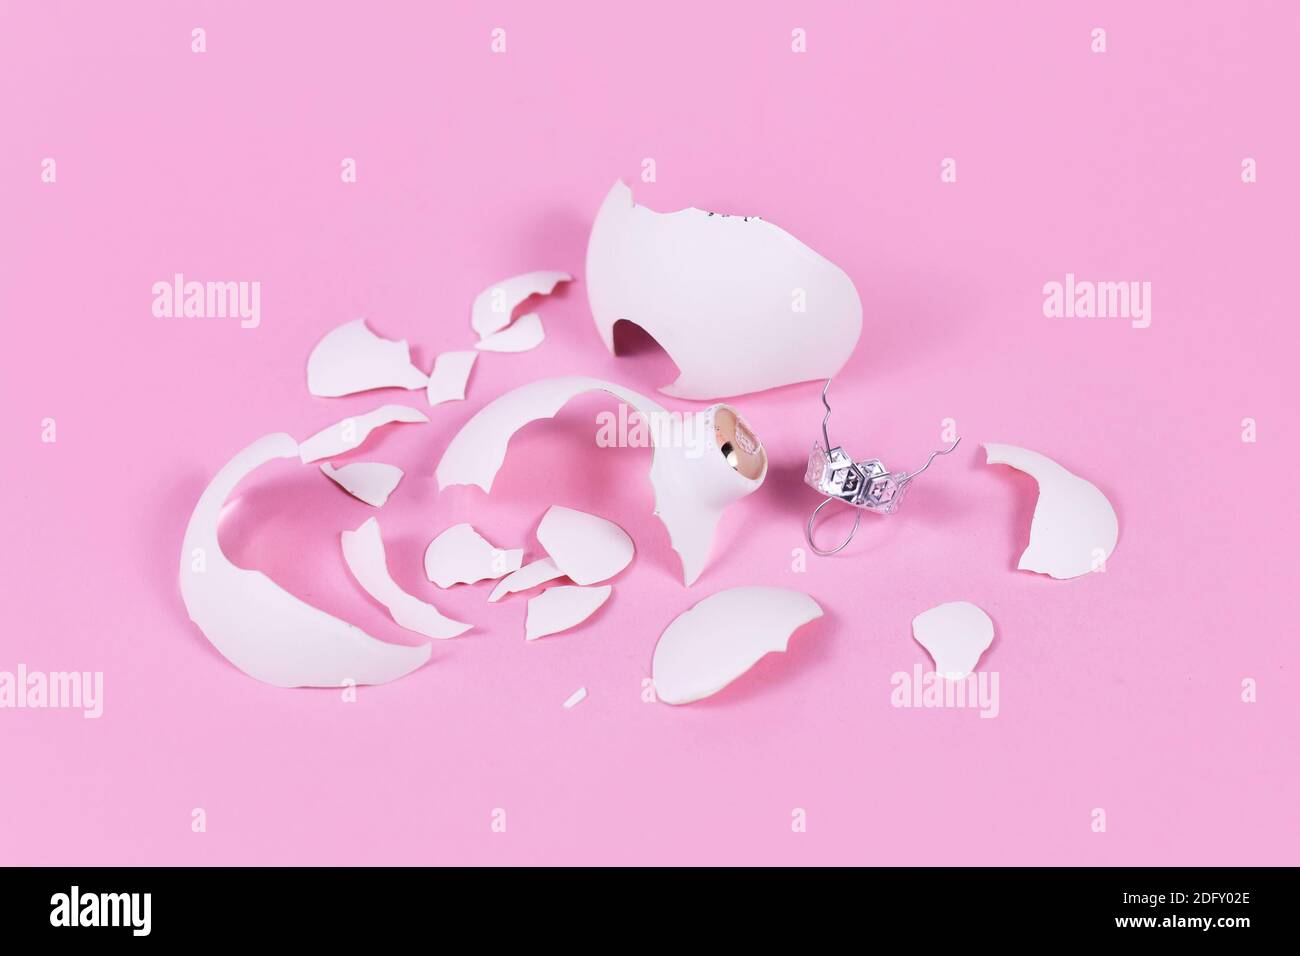 Broken white Christmas tree glass bauble shattered into many pieces on pink background Stock Photo